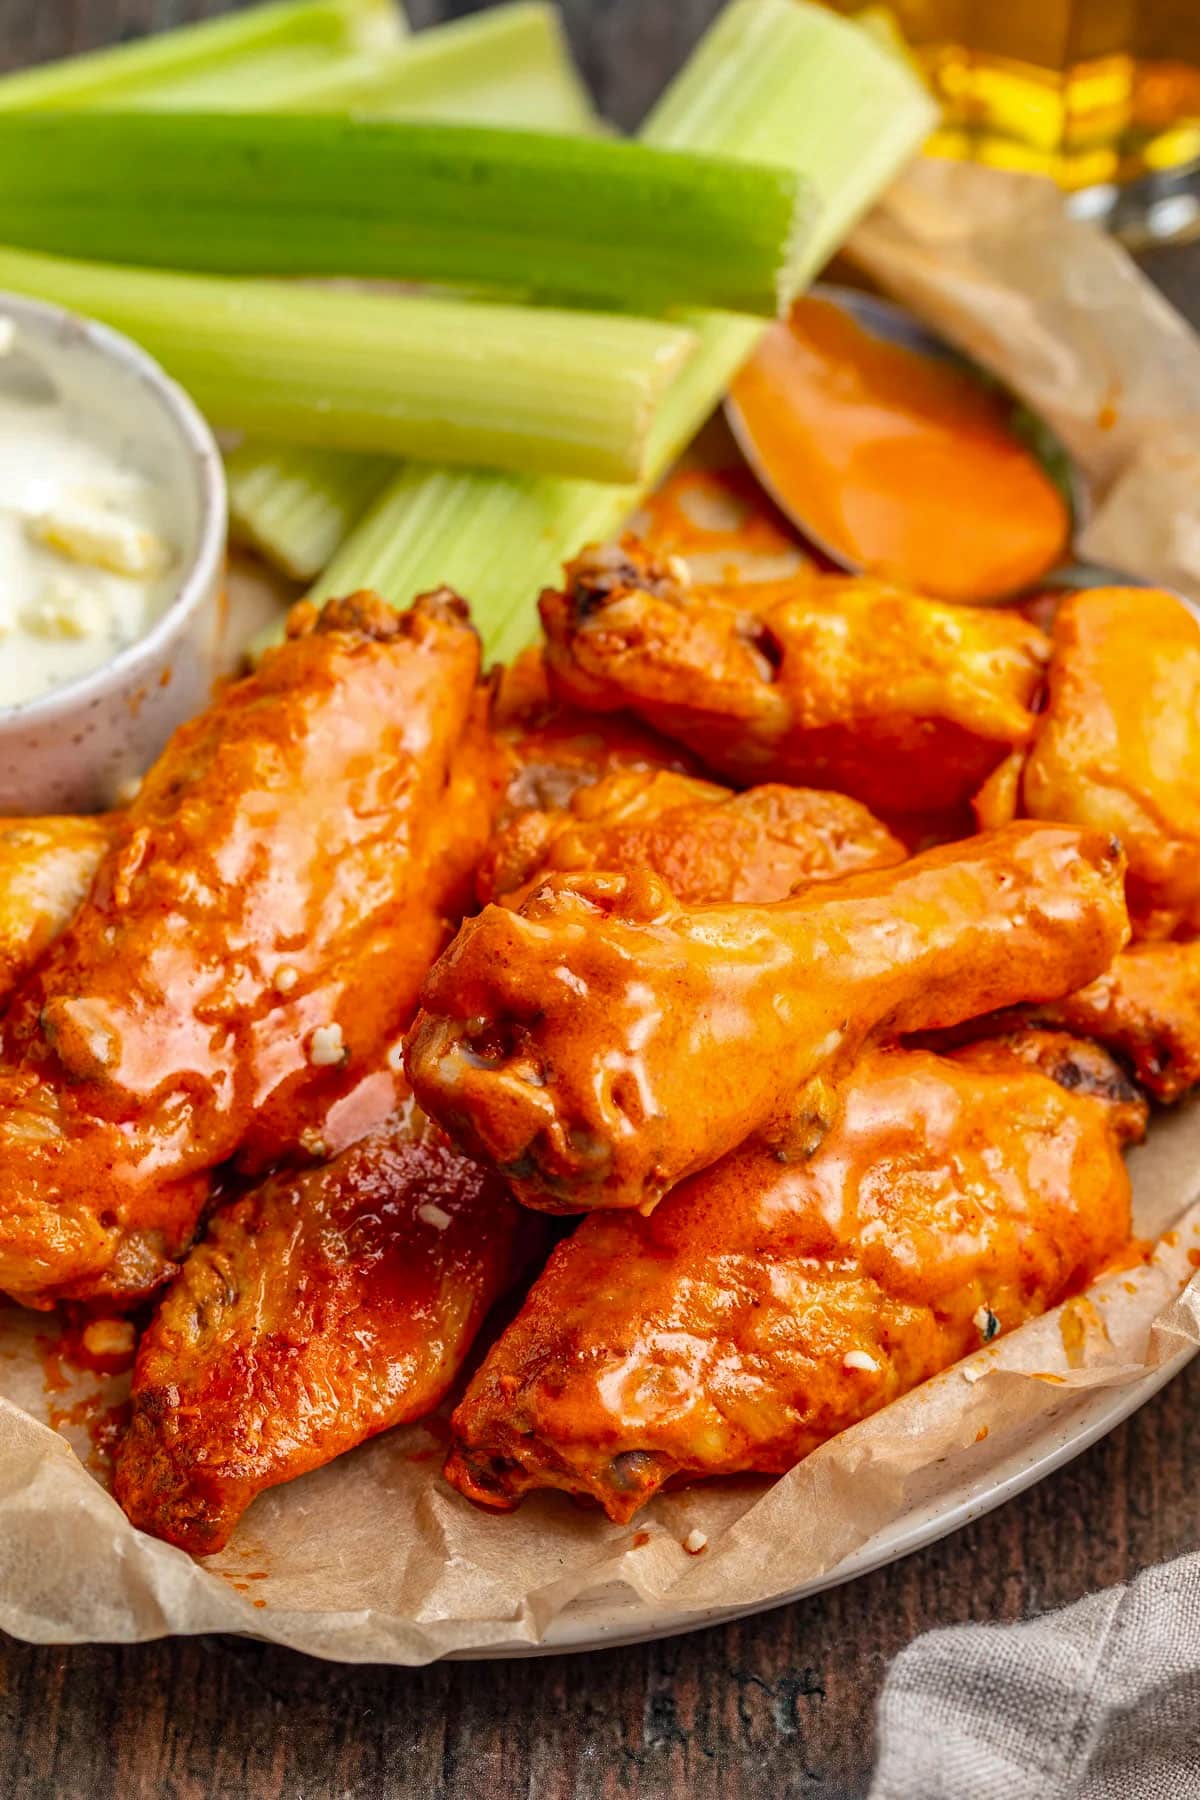 Buffalo chicken wings cooked sous vide on a platter with celery sticks and blue cheese dressing.